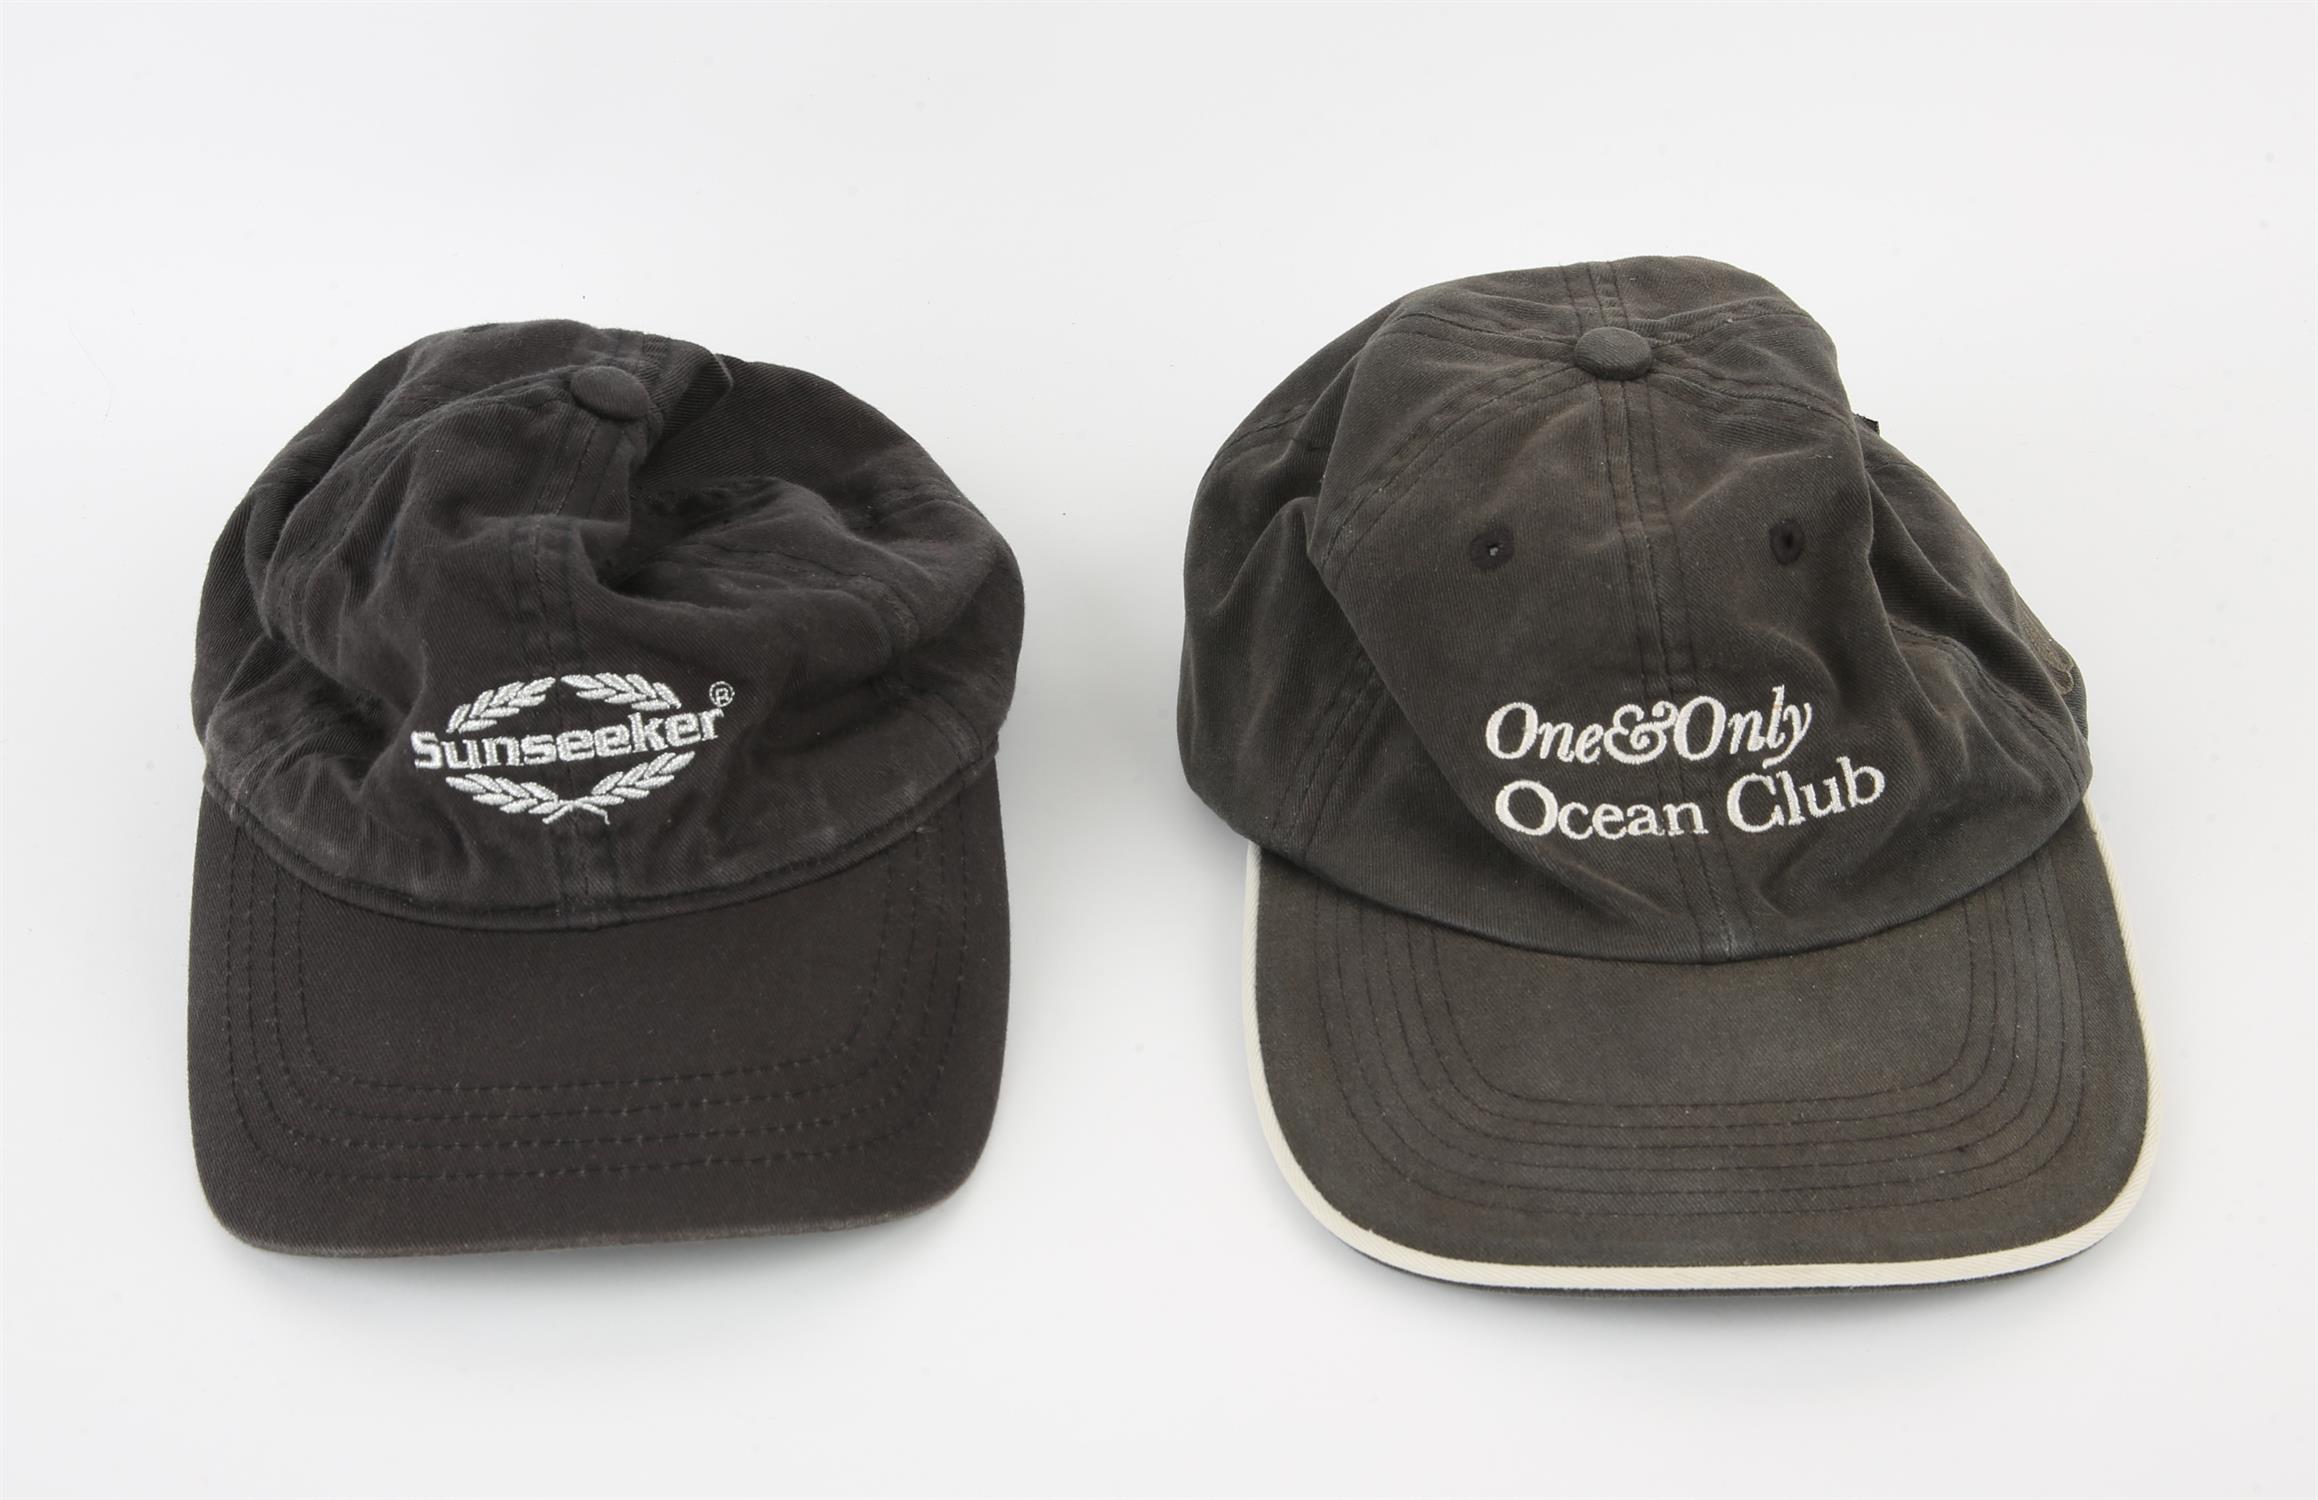 James Bond - Two crew caps for Sunseeker and Ocean Club (2). From the member of production who